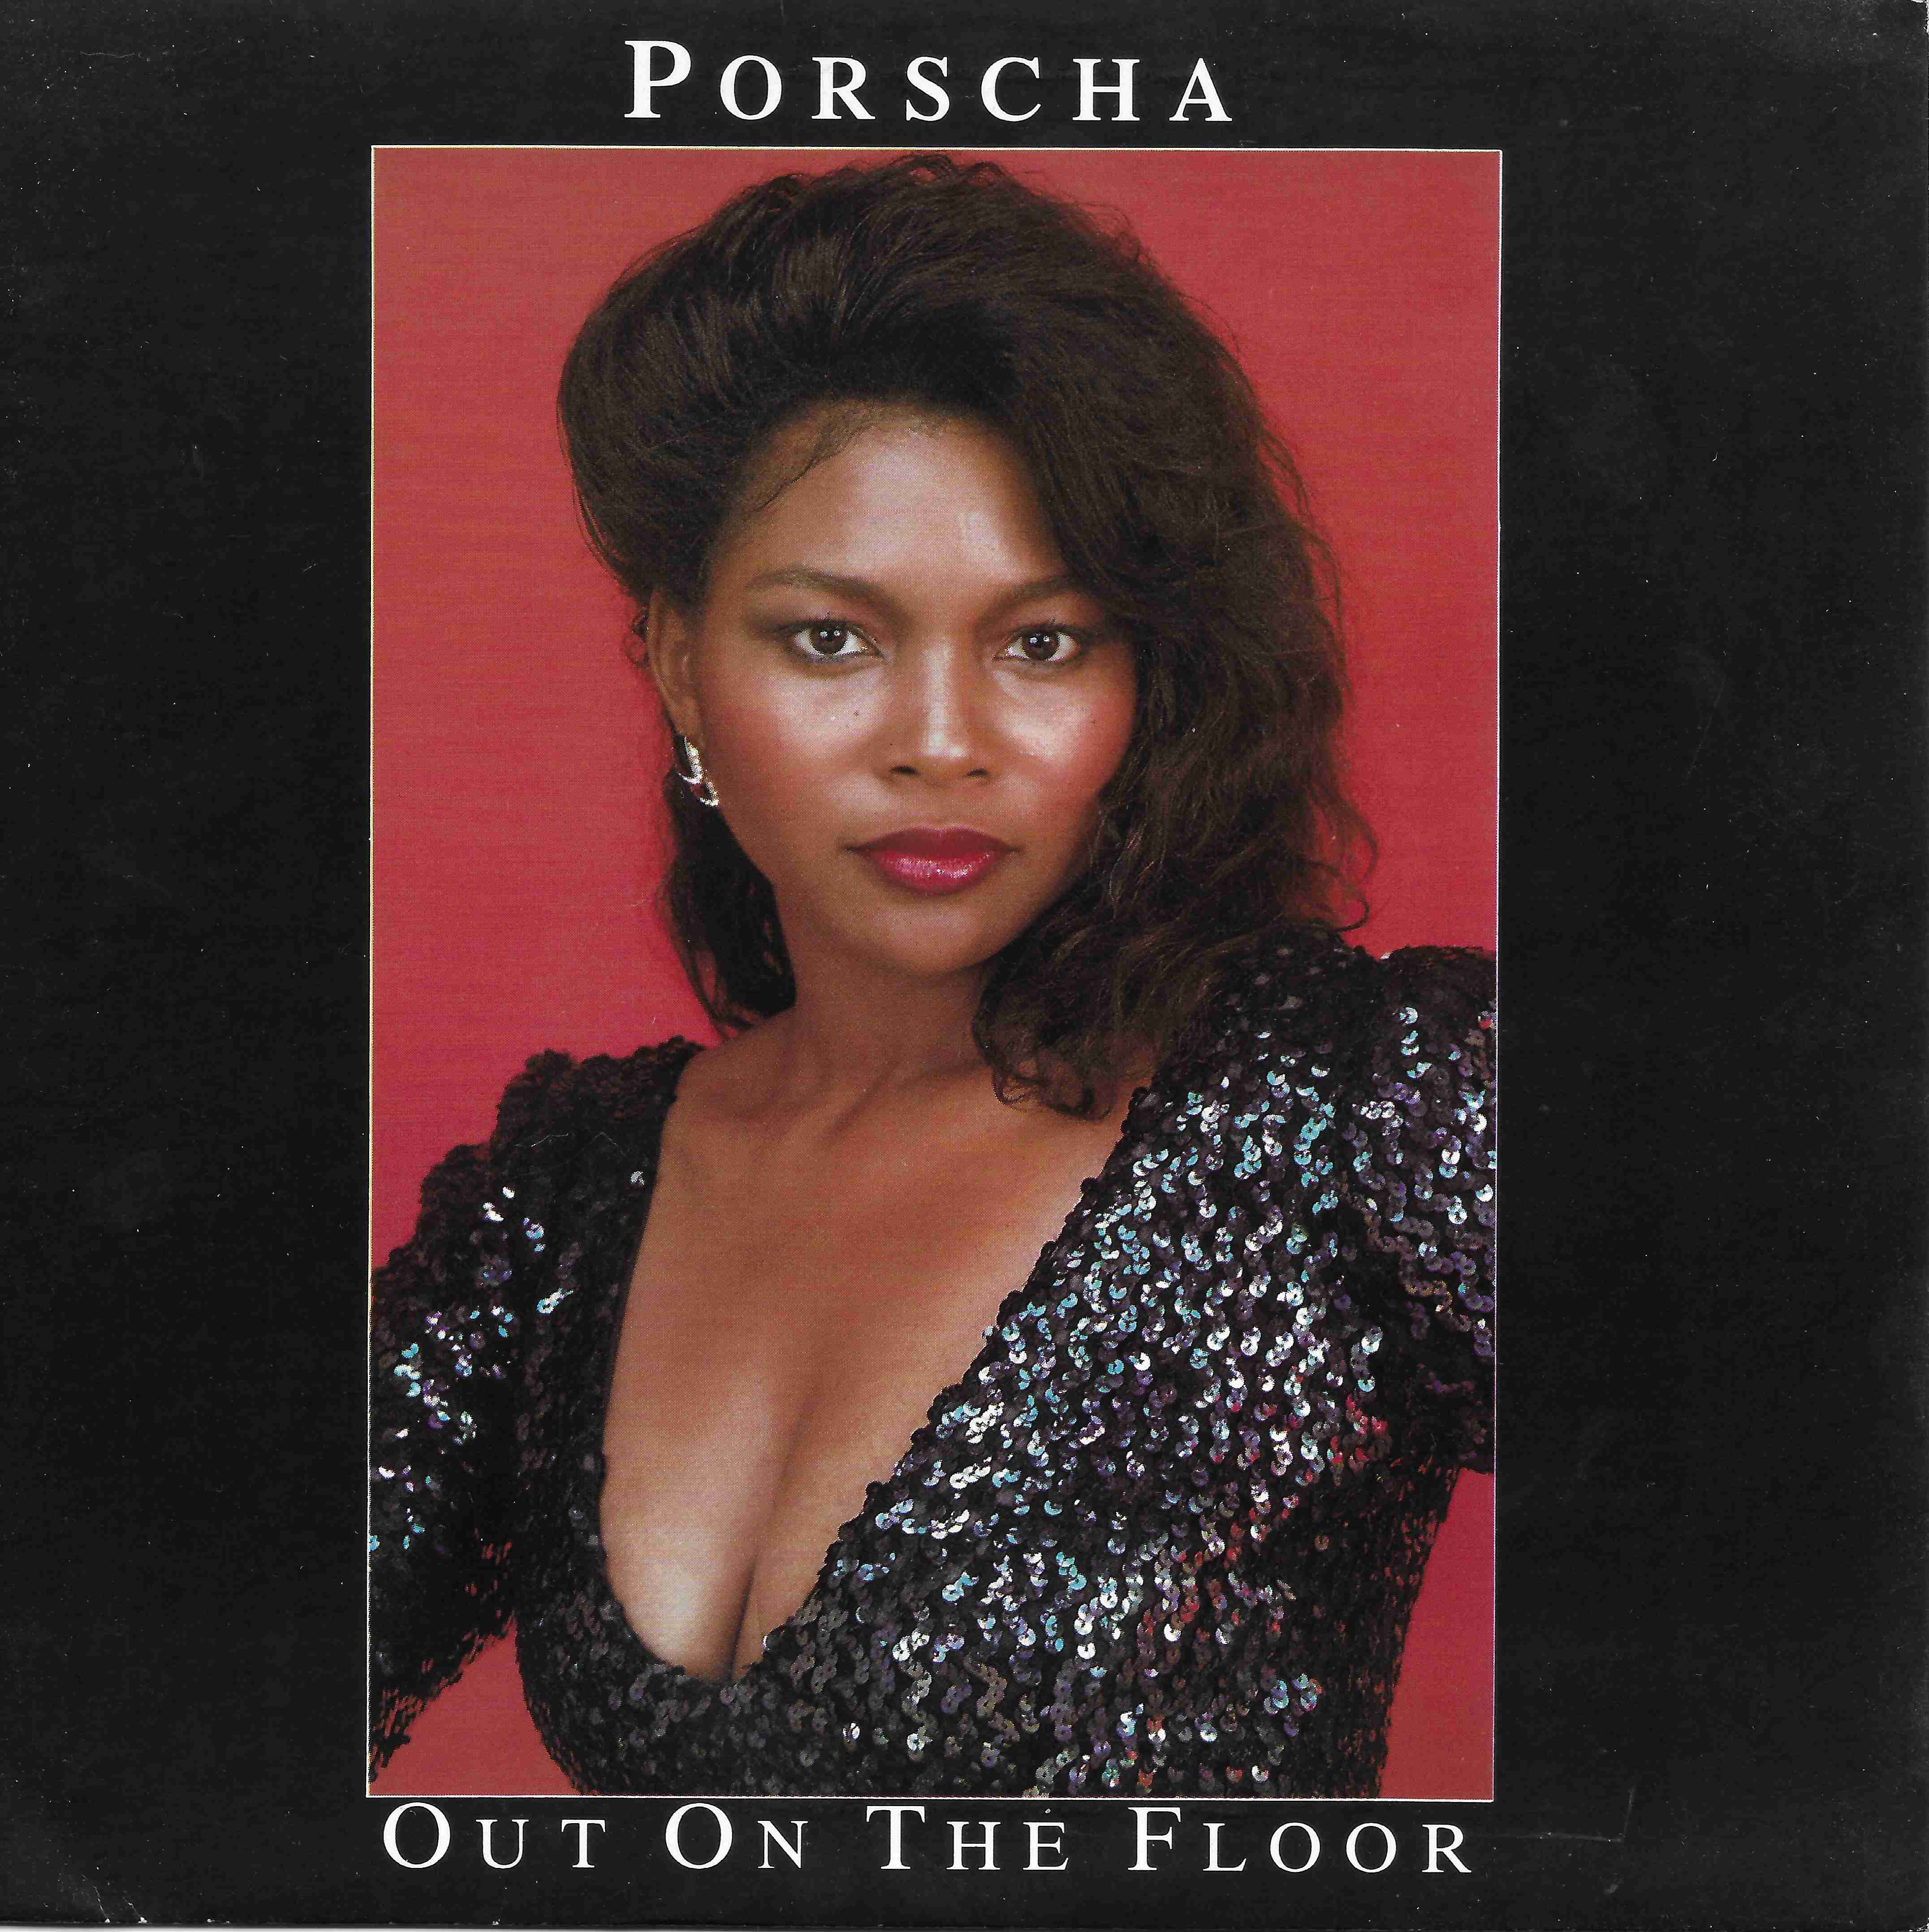 Picture of RESL 241 Out on the floor by artist Porscha from the BBC singles - Records and Tapes library